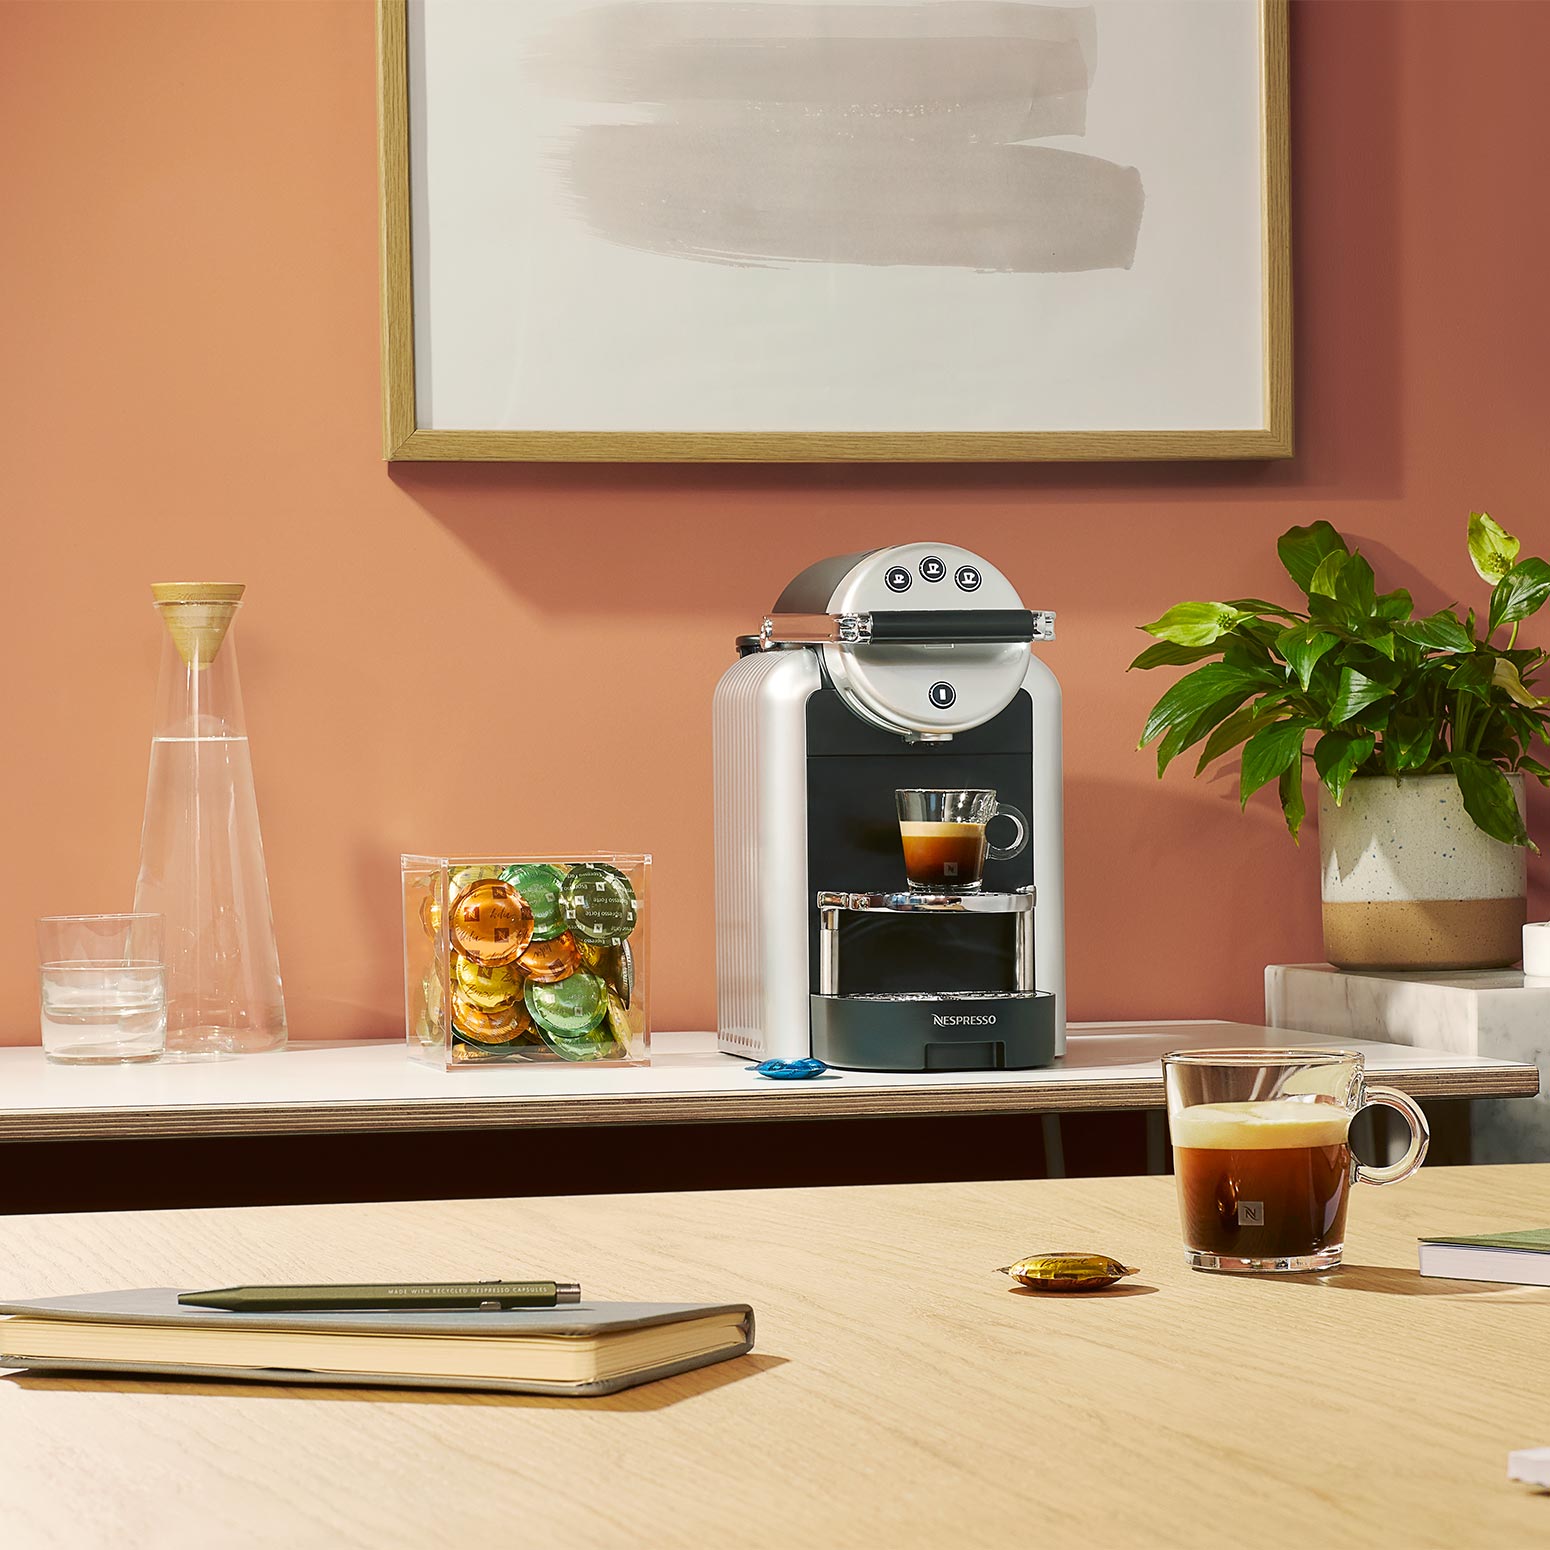 Neighbors Coffee Co - Now Introducing Nespresso ZENIUS ☕️ ZN 100 PRO STYLE,  QUALITY AND PROFESSIONAL PERFORMANCE IN A COMPACT COFFEE MACHINE Ideal for  any size of 💼 business, the Zenius coffee